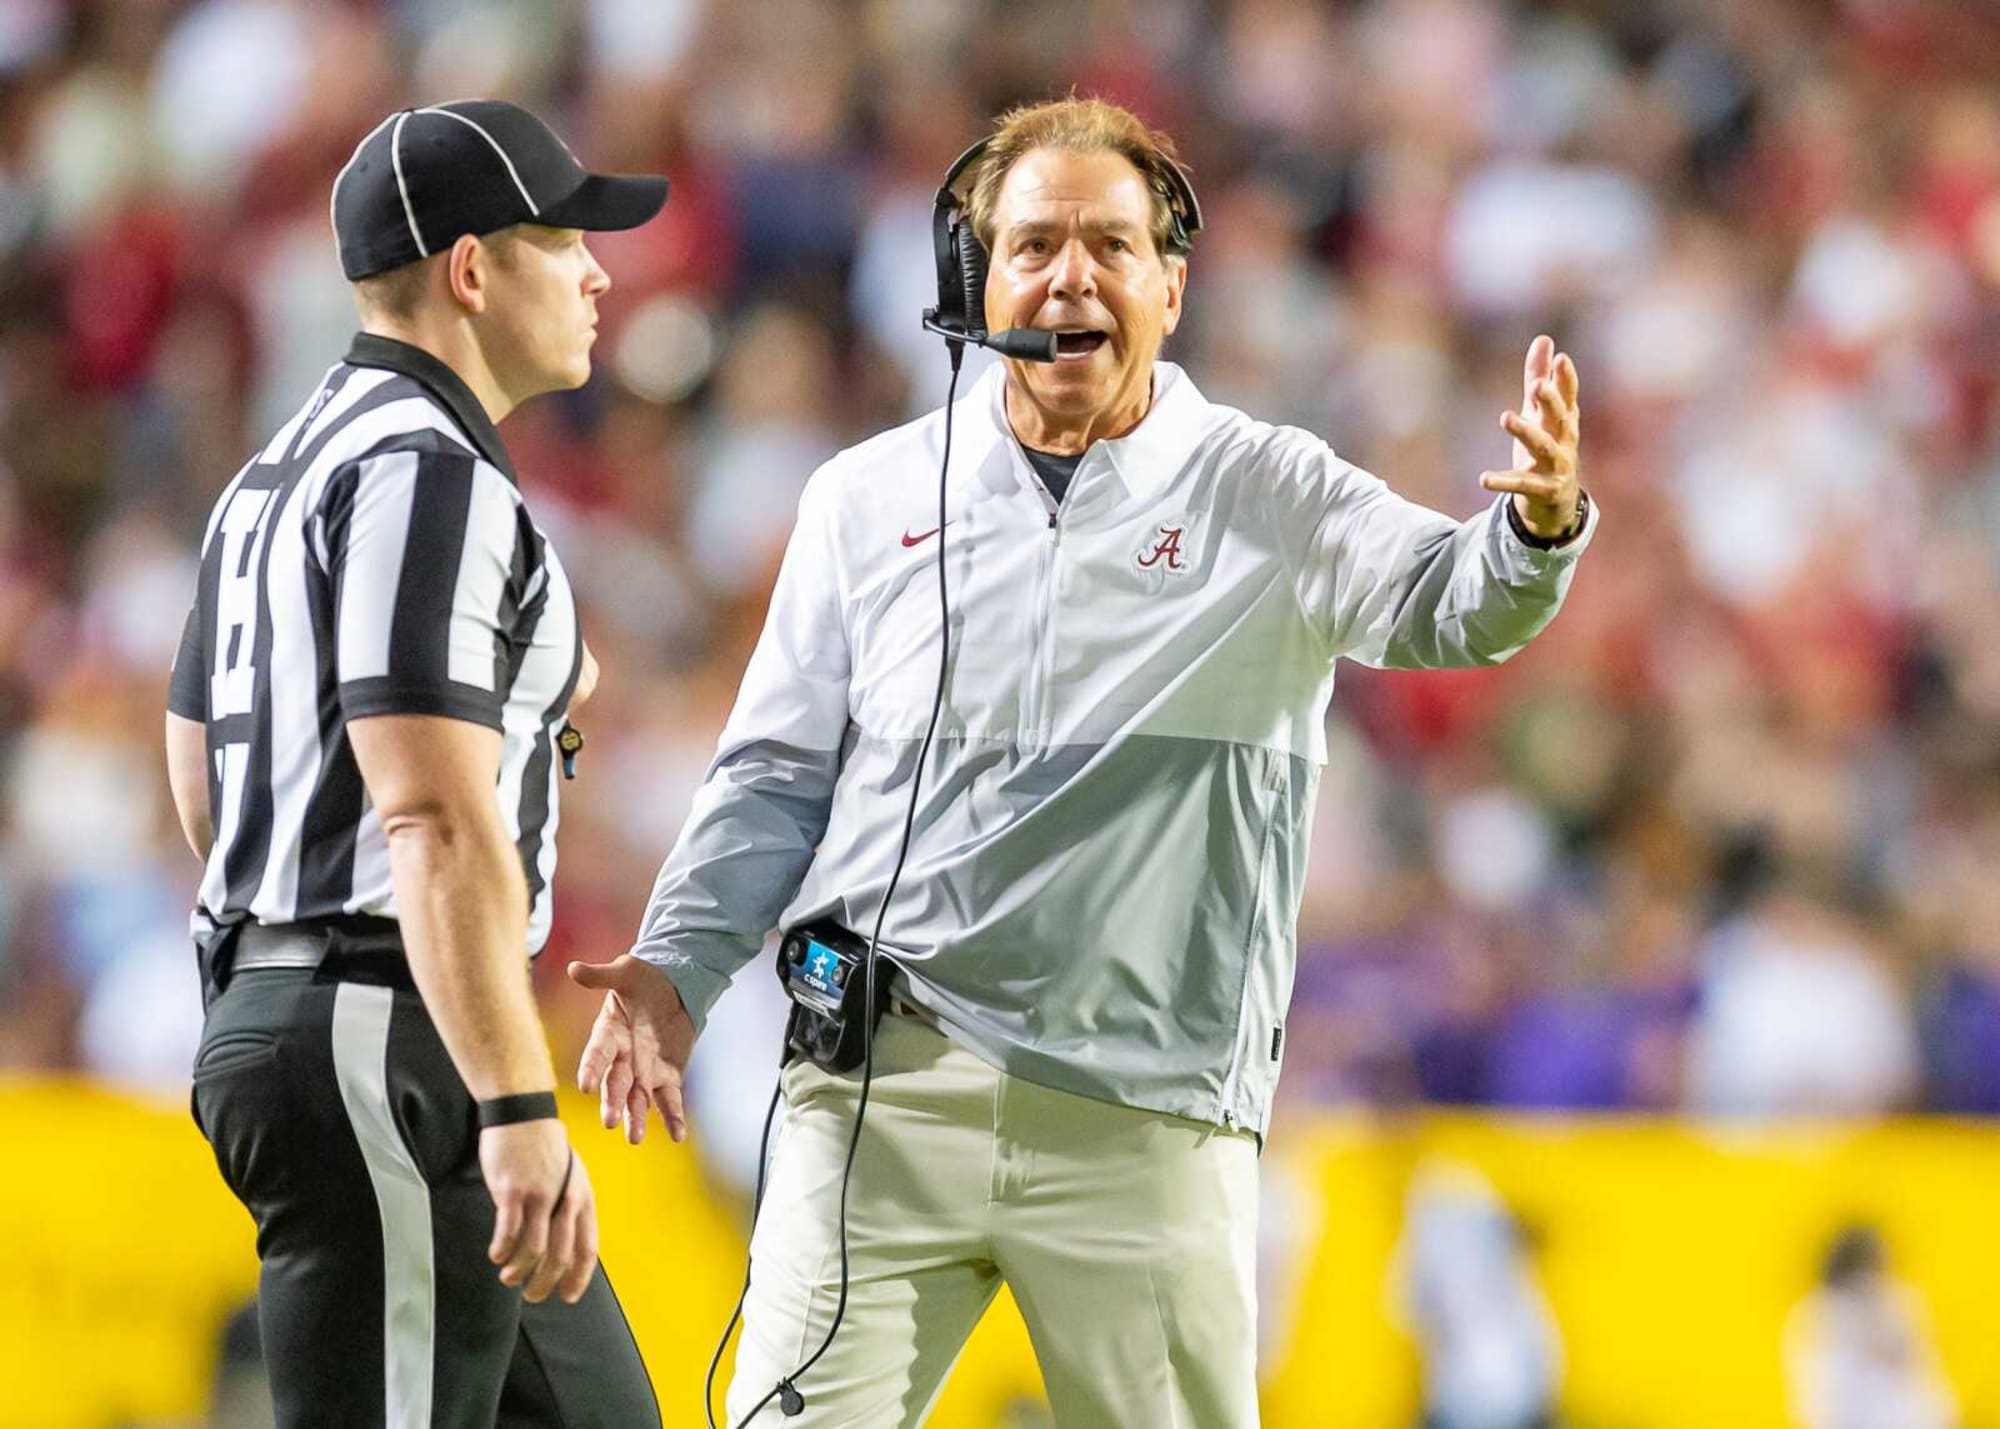 Nick Saban responds to Alabama being left out of College Football Playoff